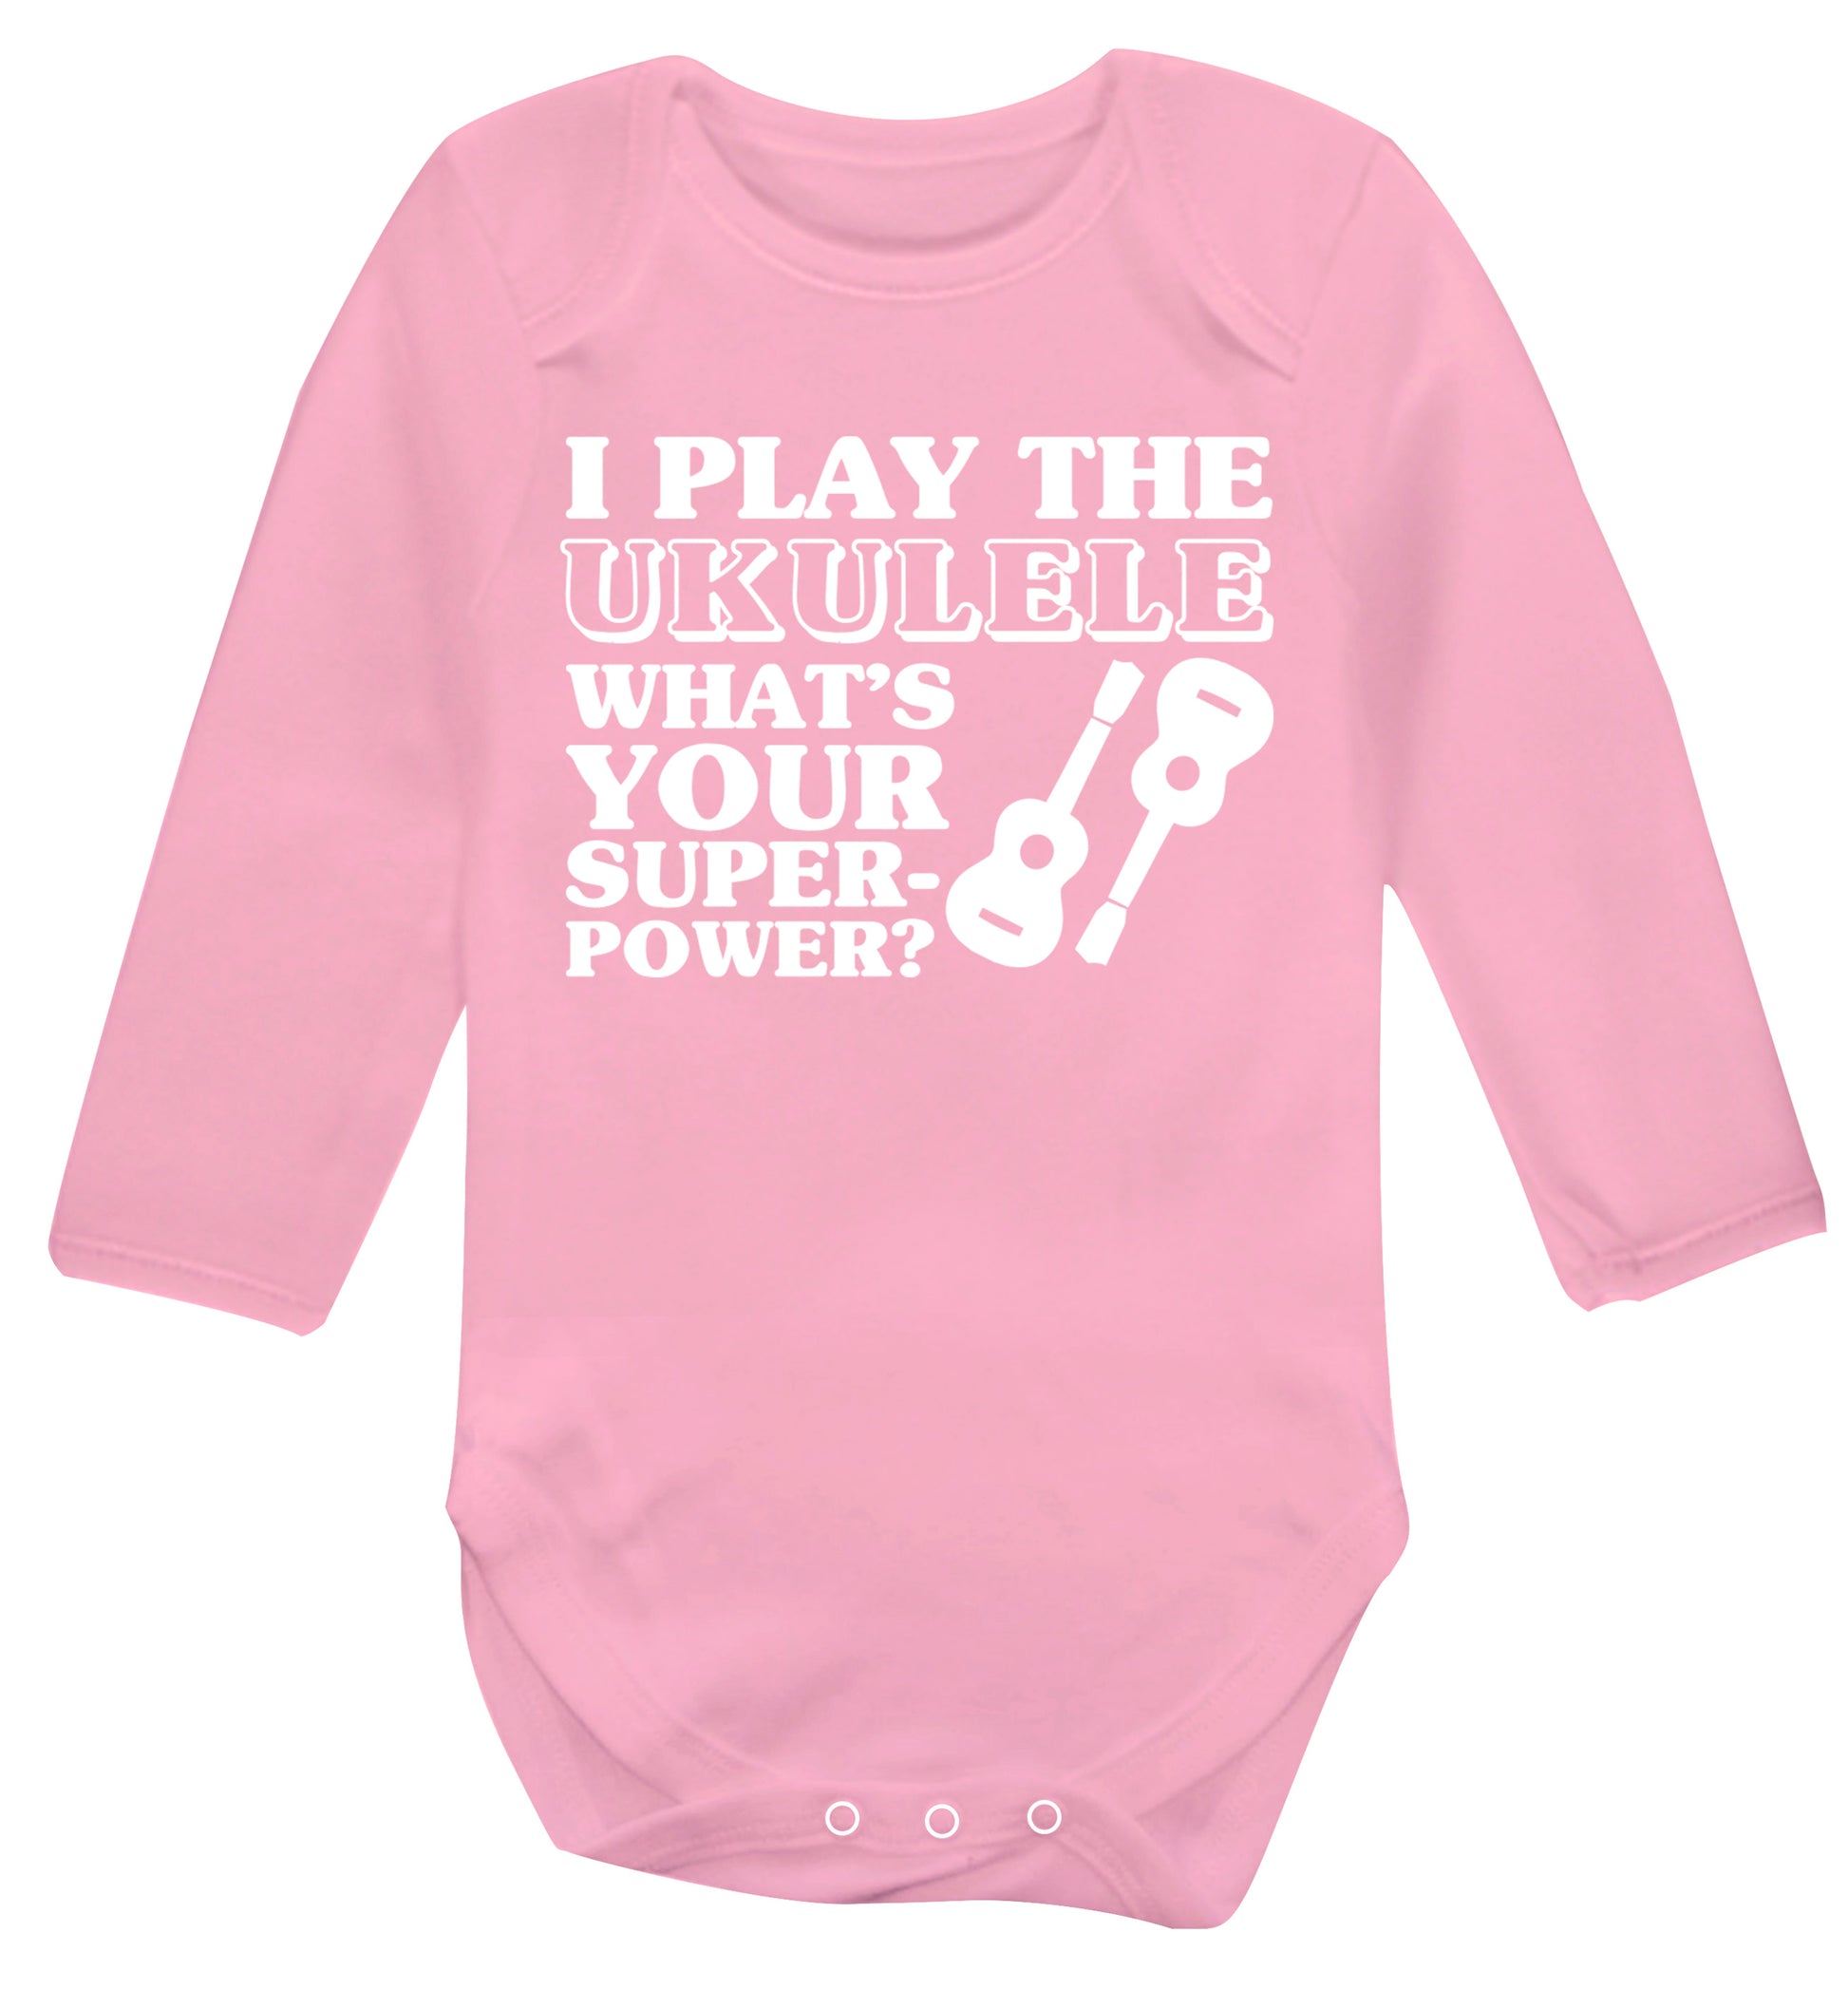 I play the ukulele what's your superpower? Baby Vest long sleeved pale pink 6-12 months